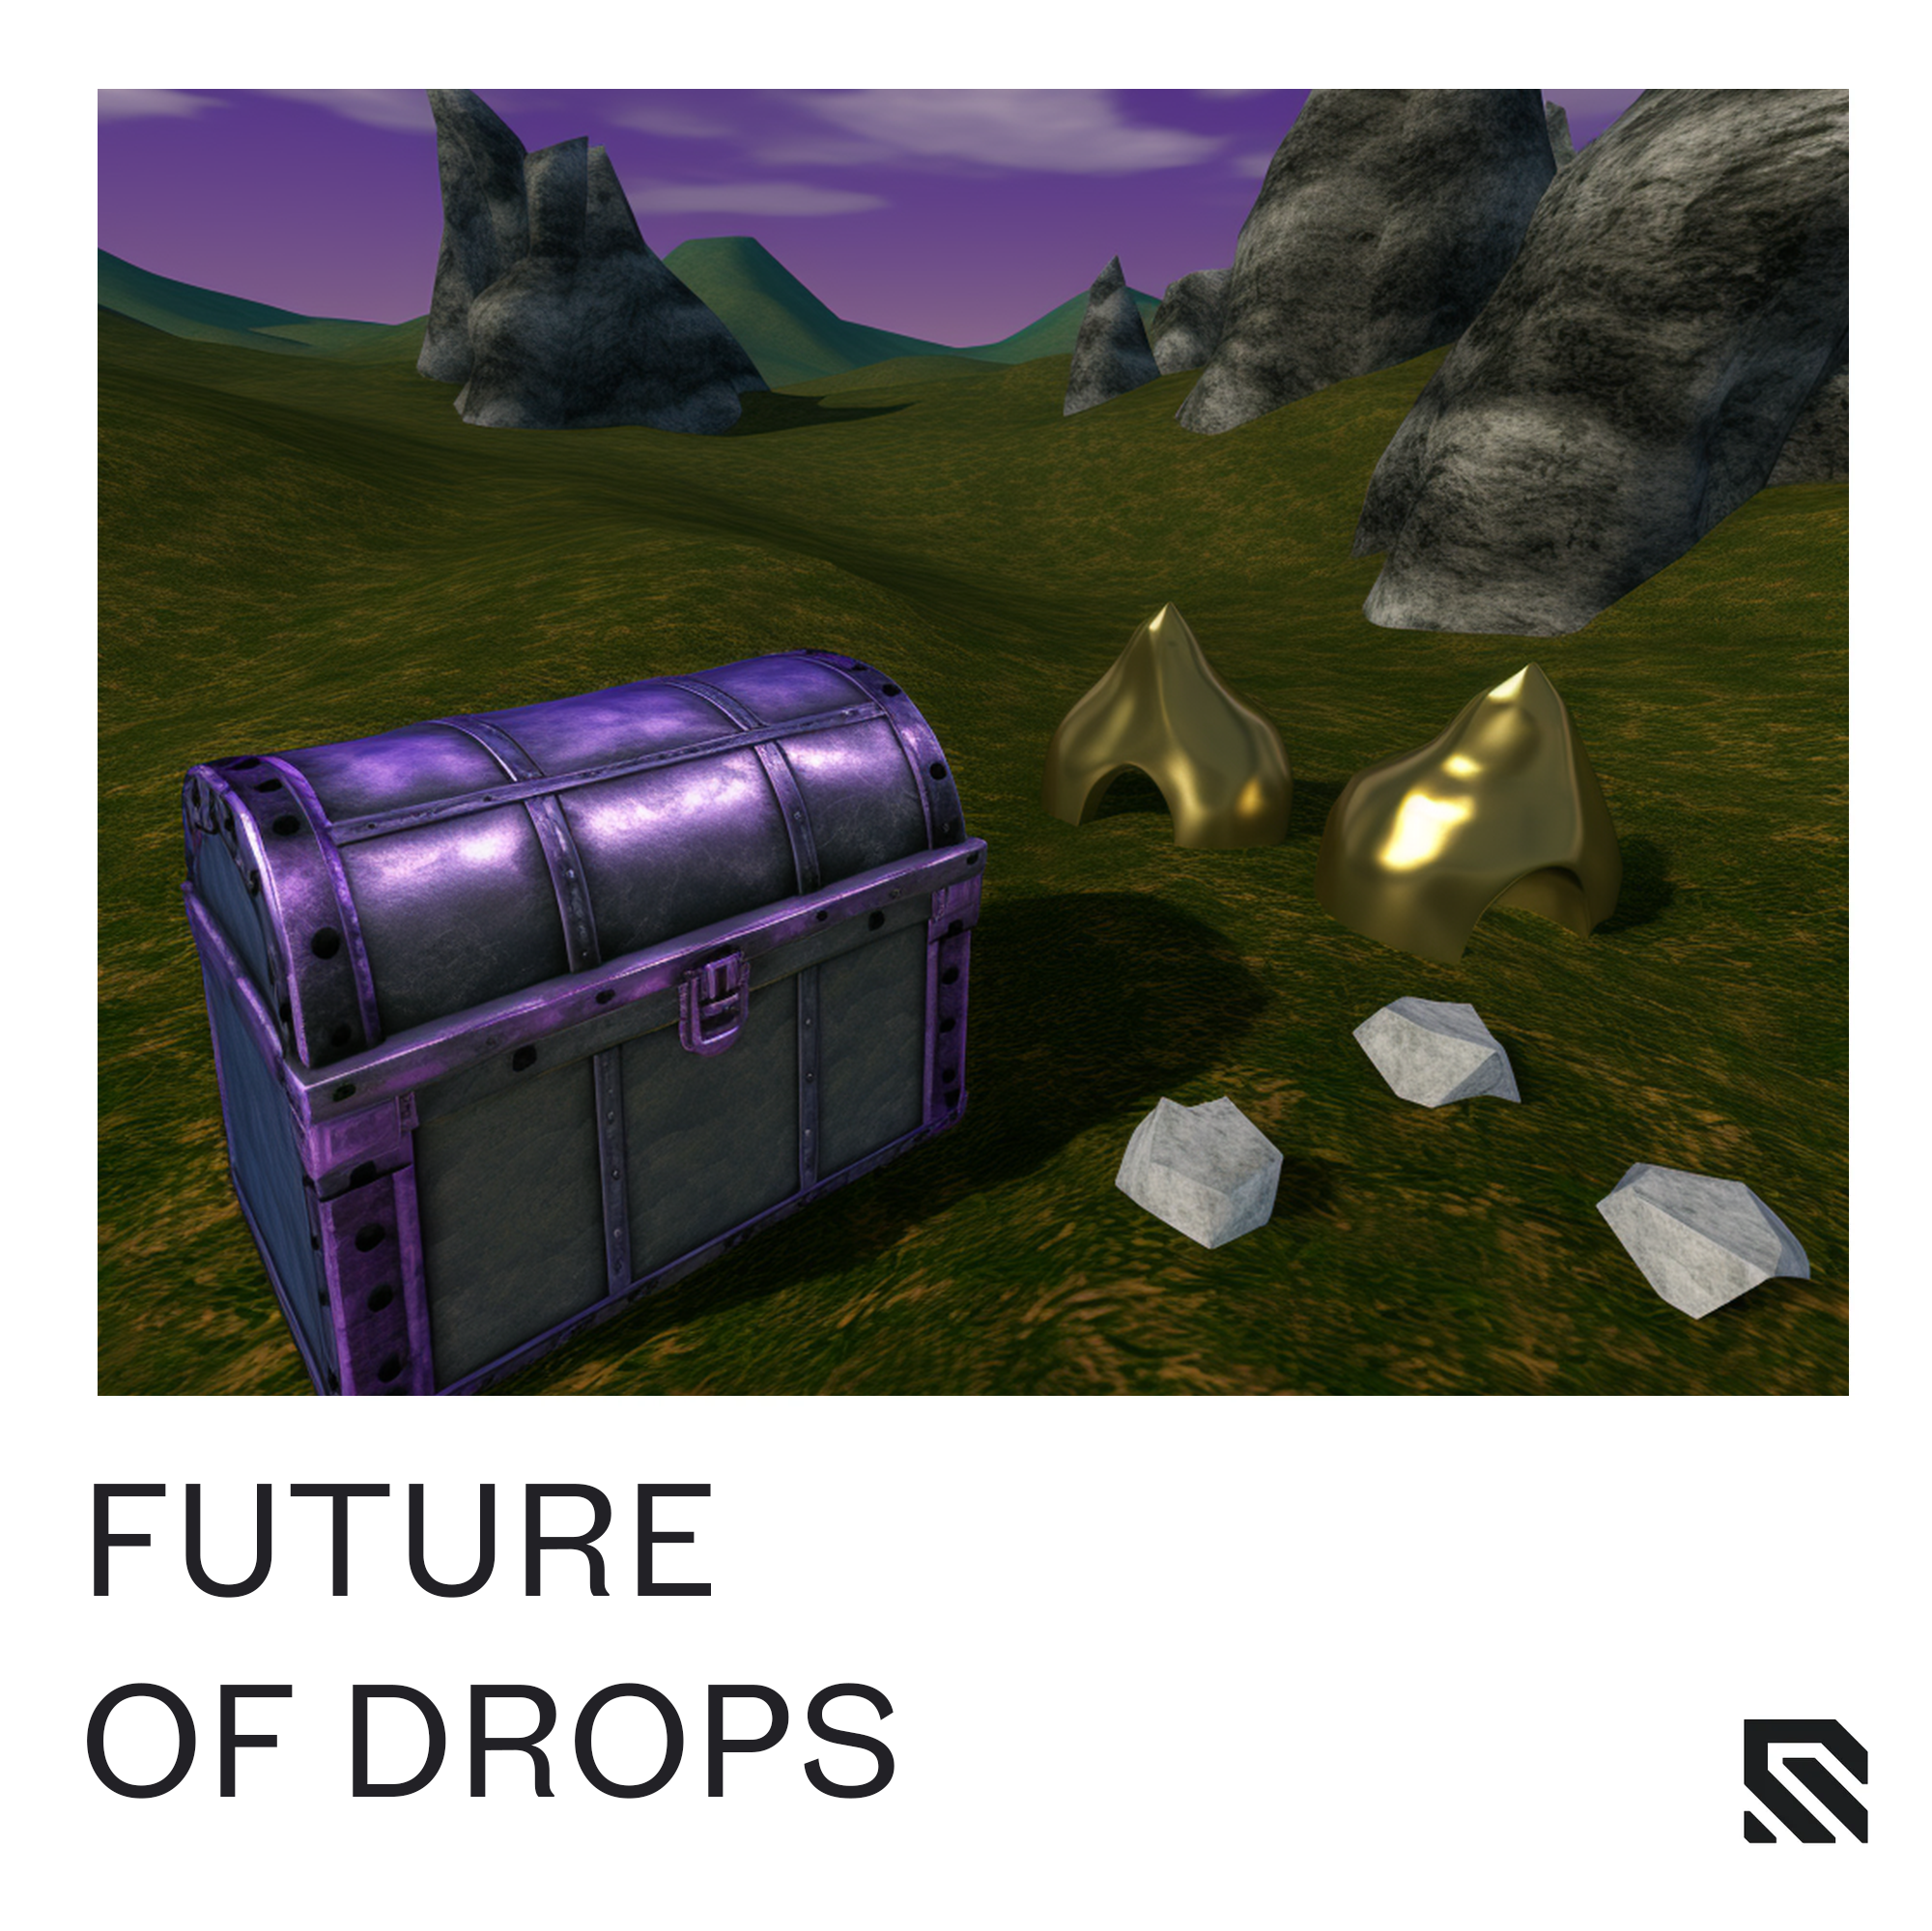 WALLHACK Future Limited Edition Drops Treasure chest in a digital game world from the 90s, green grassy field with stone